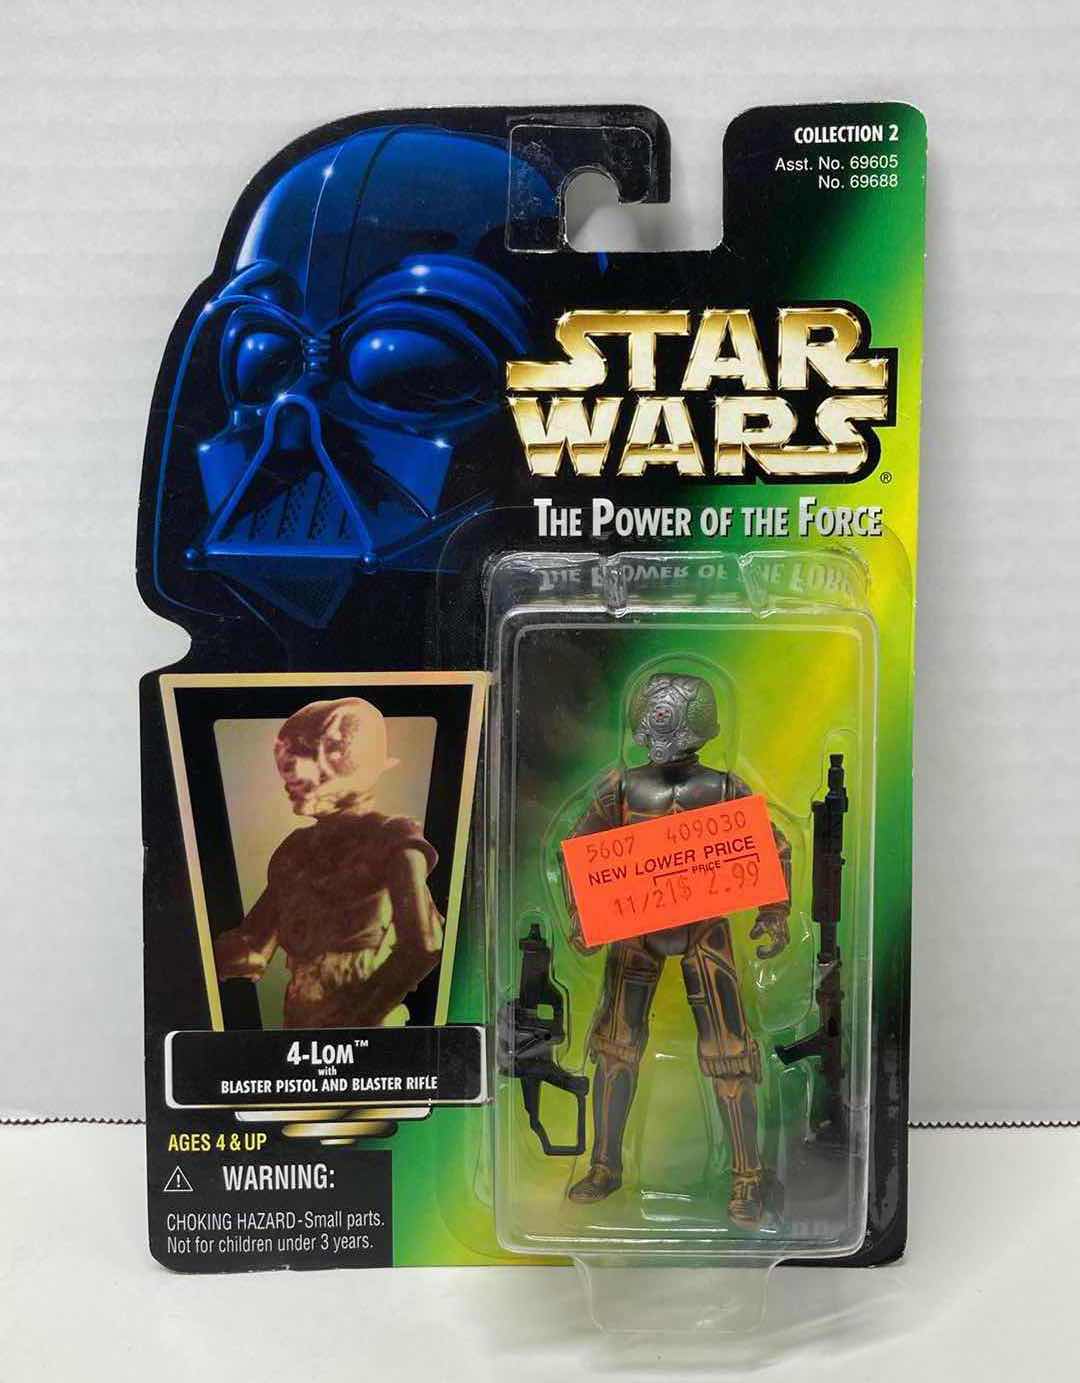 Photo 1 of NEW STAR WARS THE POWER OF THE FORCE ACTION FIGURE, 4-LOM W BLASTER PISTOL & BLASTER RIFLE